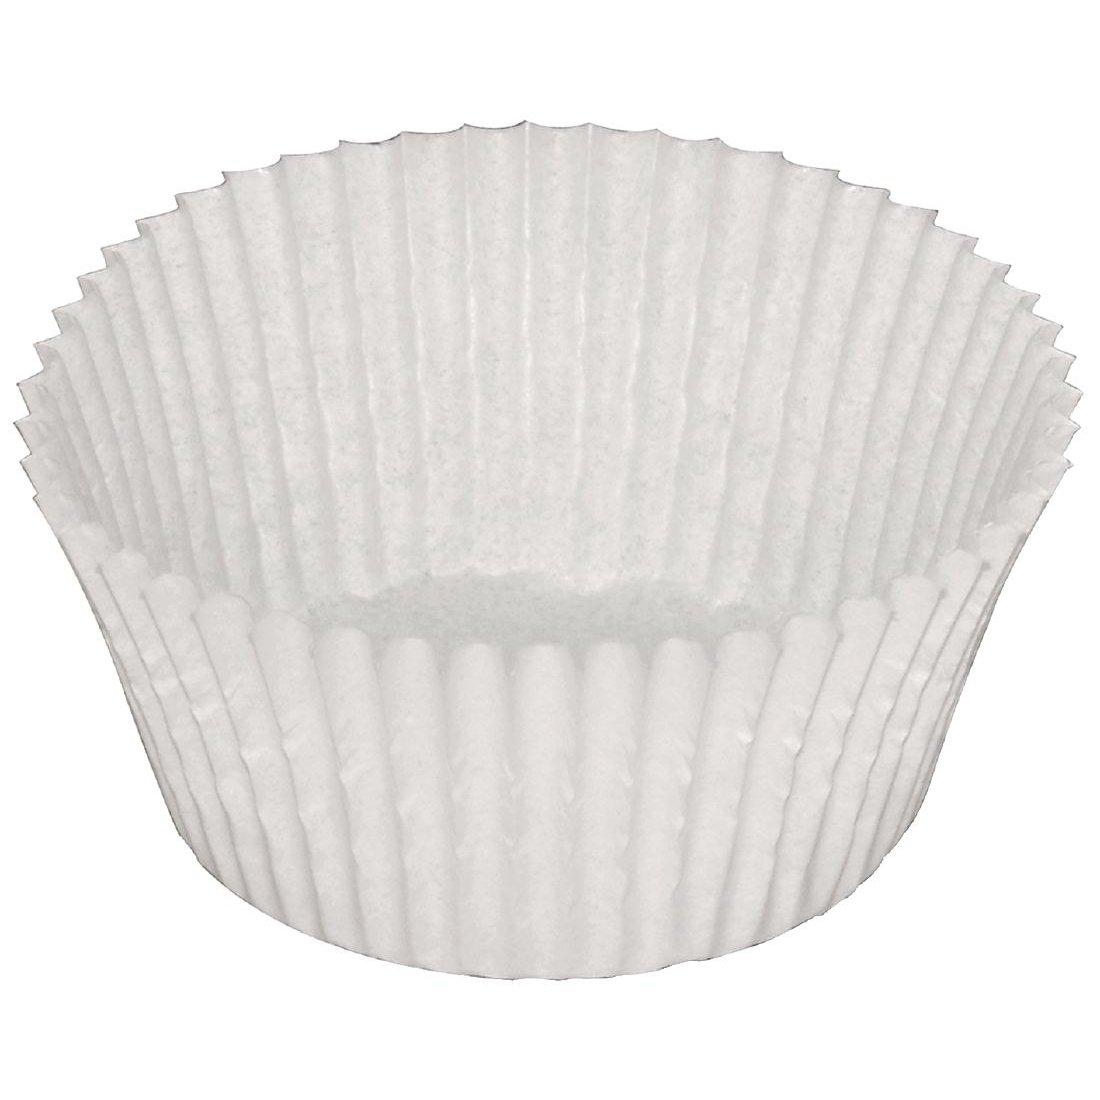 Cupcake Paper Cases Pack of 1000